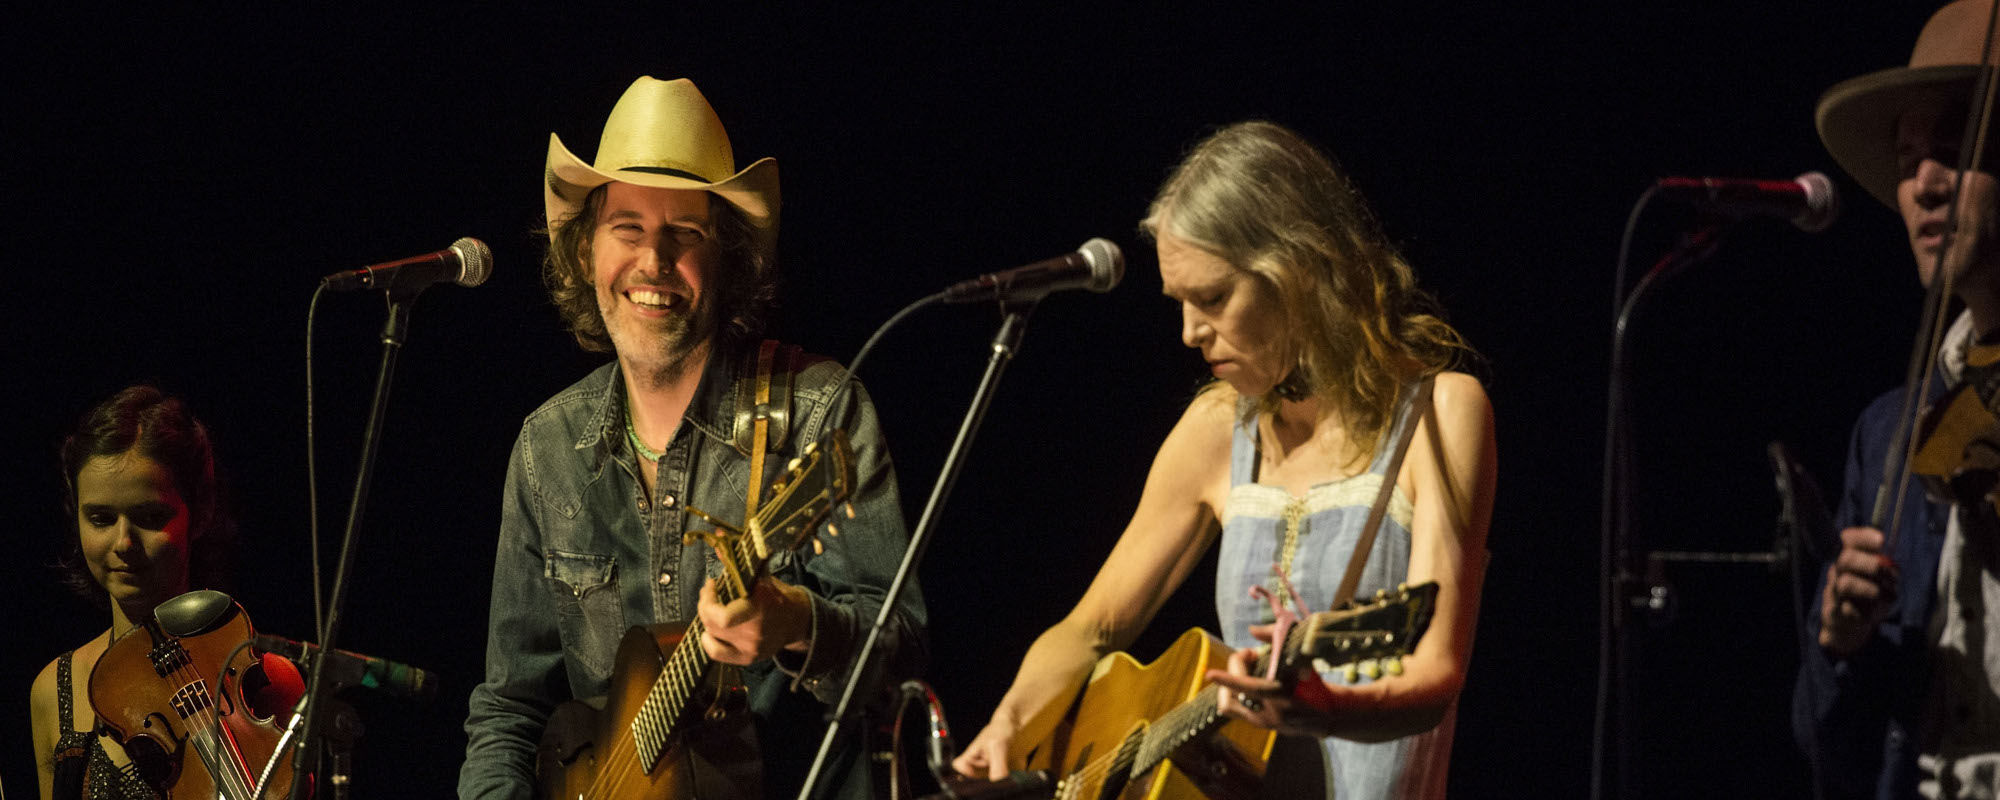 5 Songs You Didn’t Know Gillian Welch and Dave Rawlings Wrote That Were Covered by Other Artists